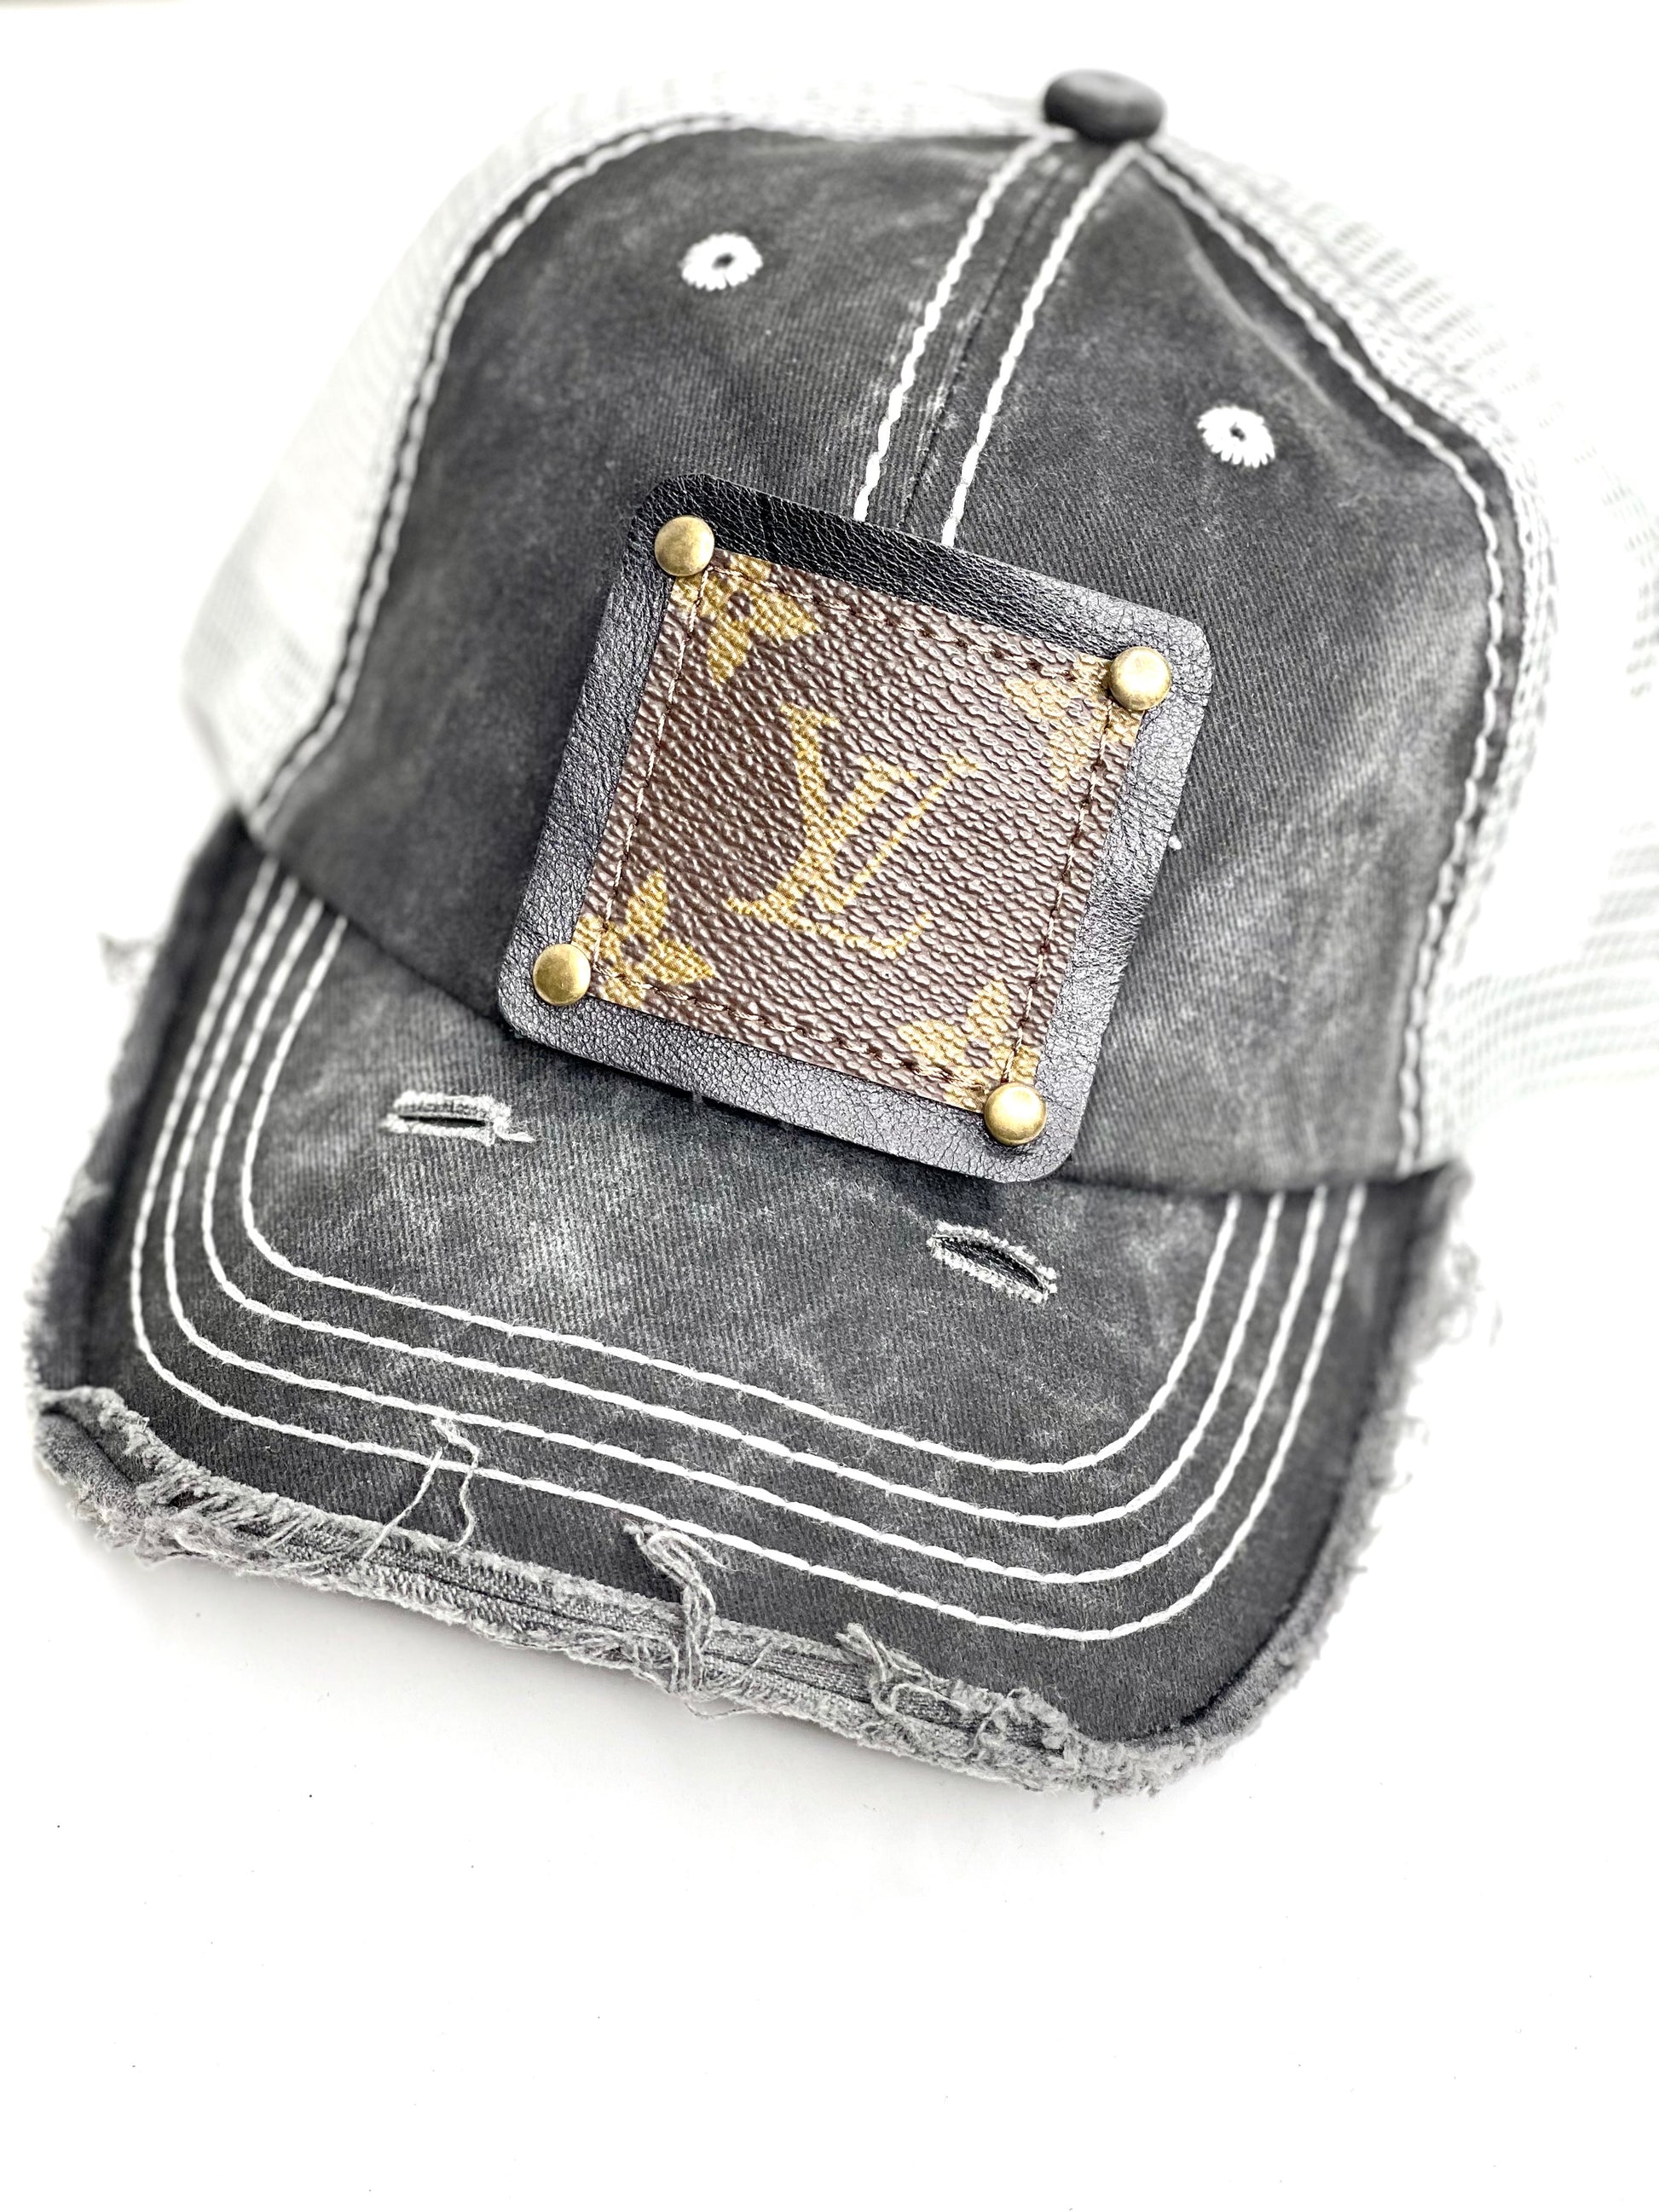 SS1 - Faded Black with Full Distressed Brim, Grey Back Black/Antique - Patches Of Upcycling